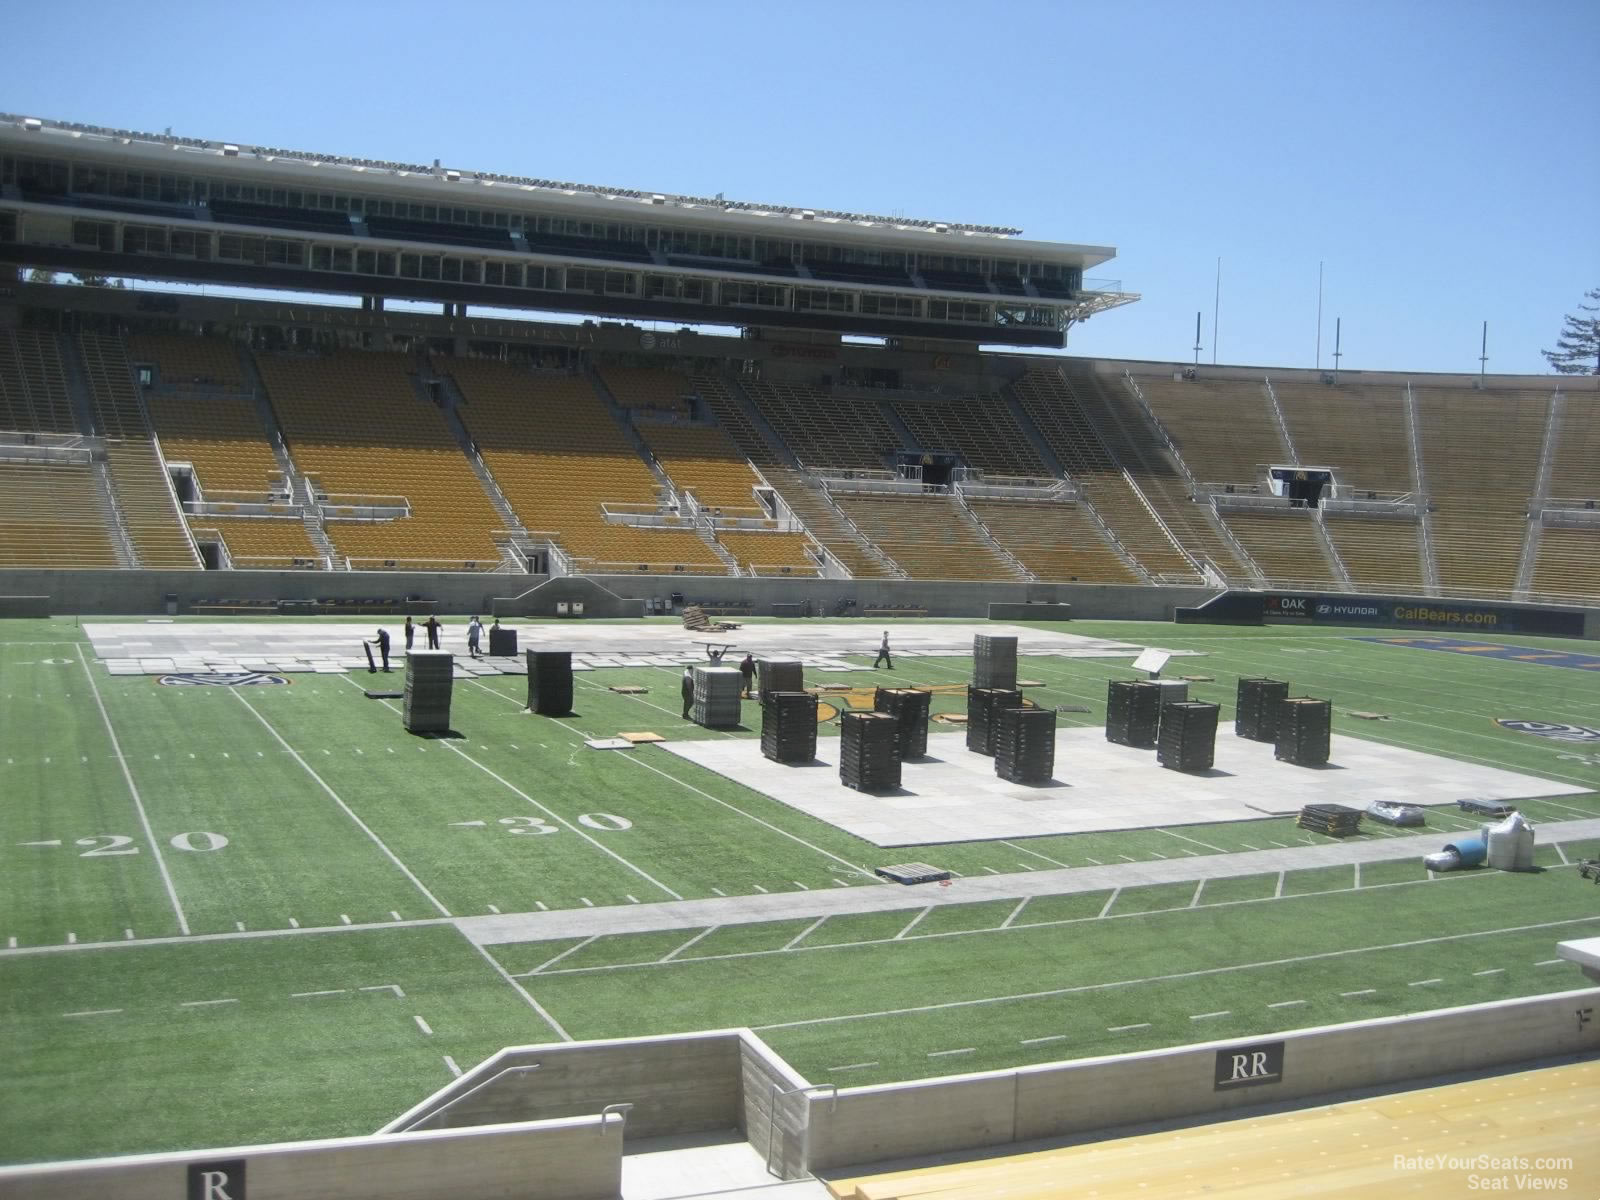 section r, row 22 seat view  - memorial stadium (cal)